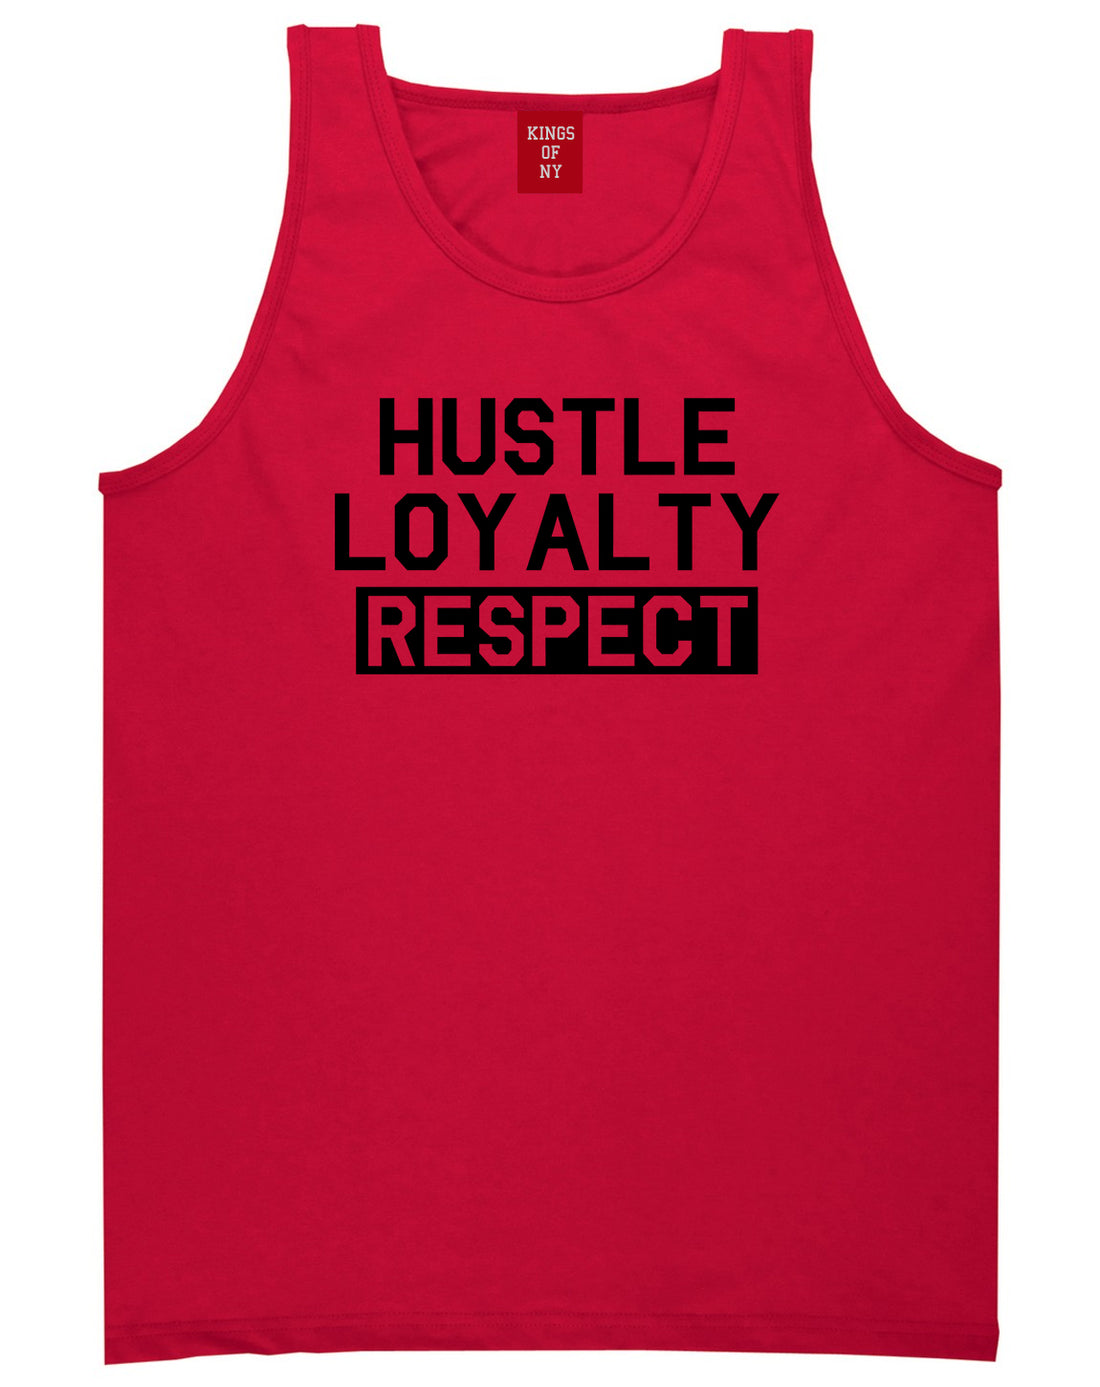 Hustle Loyalty Respect Mens Tank Top Shirt Red by Kings Of NY